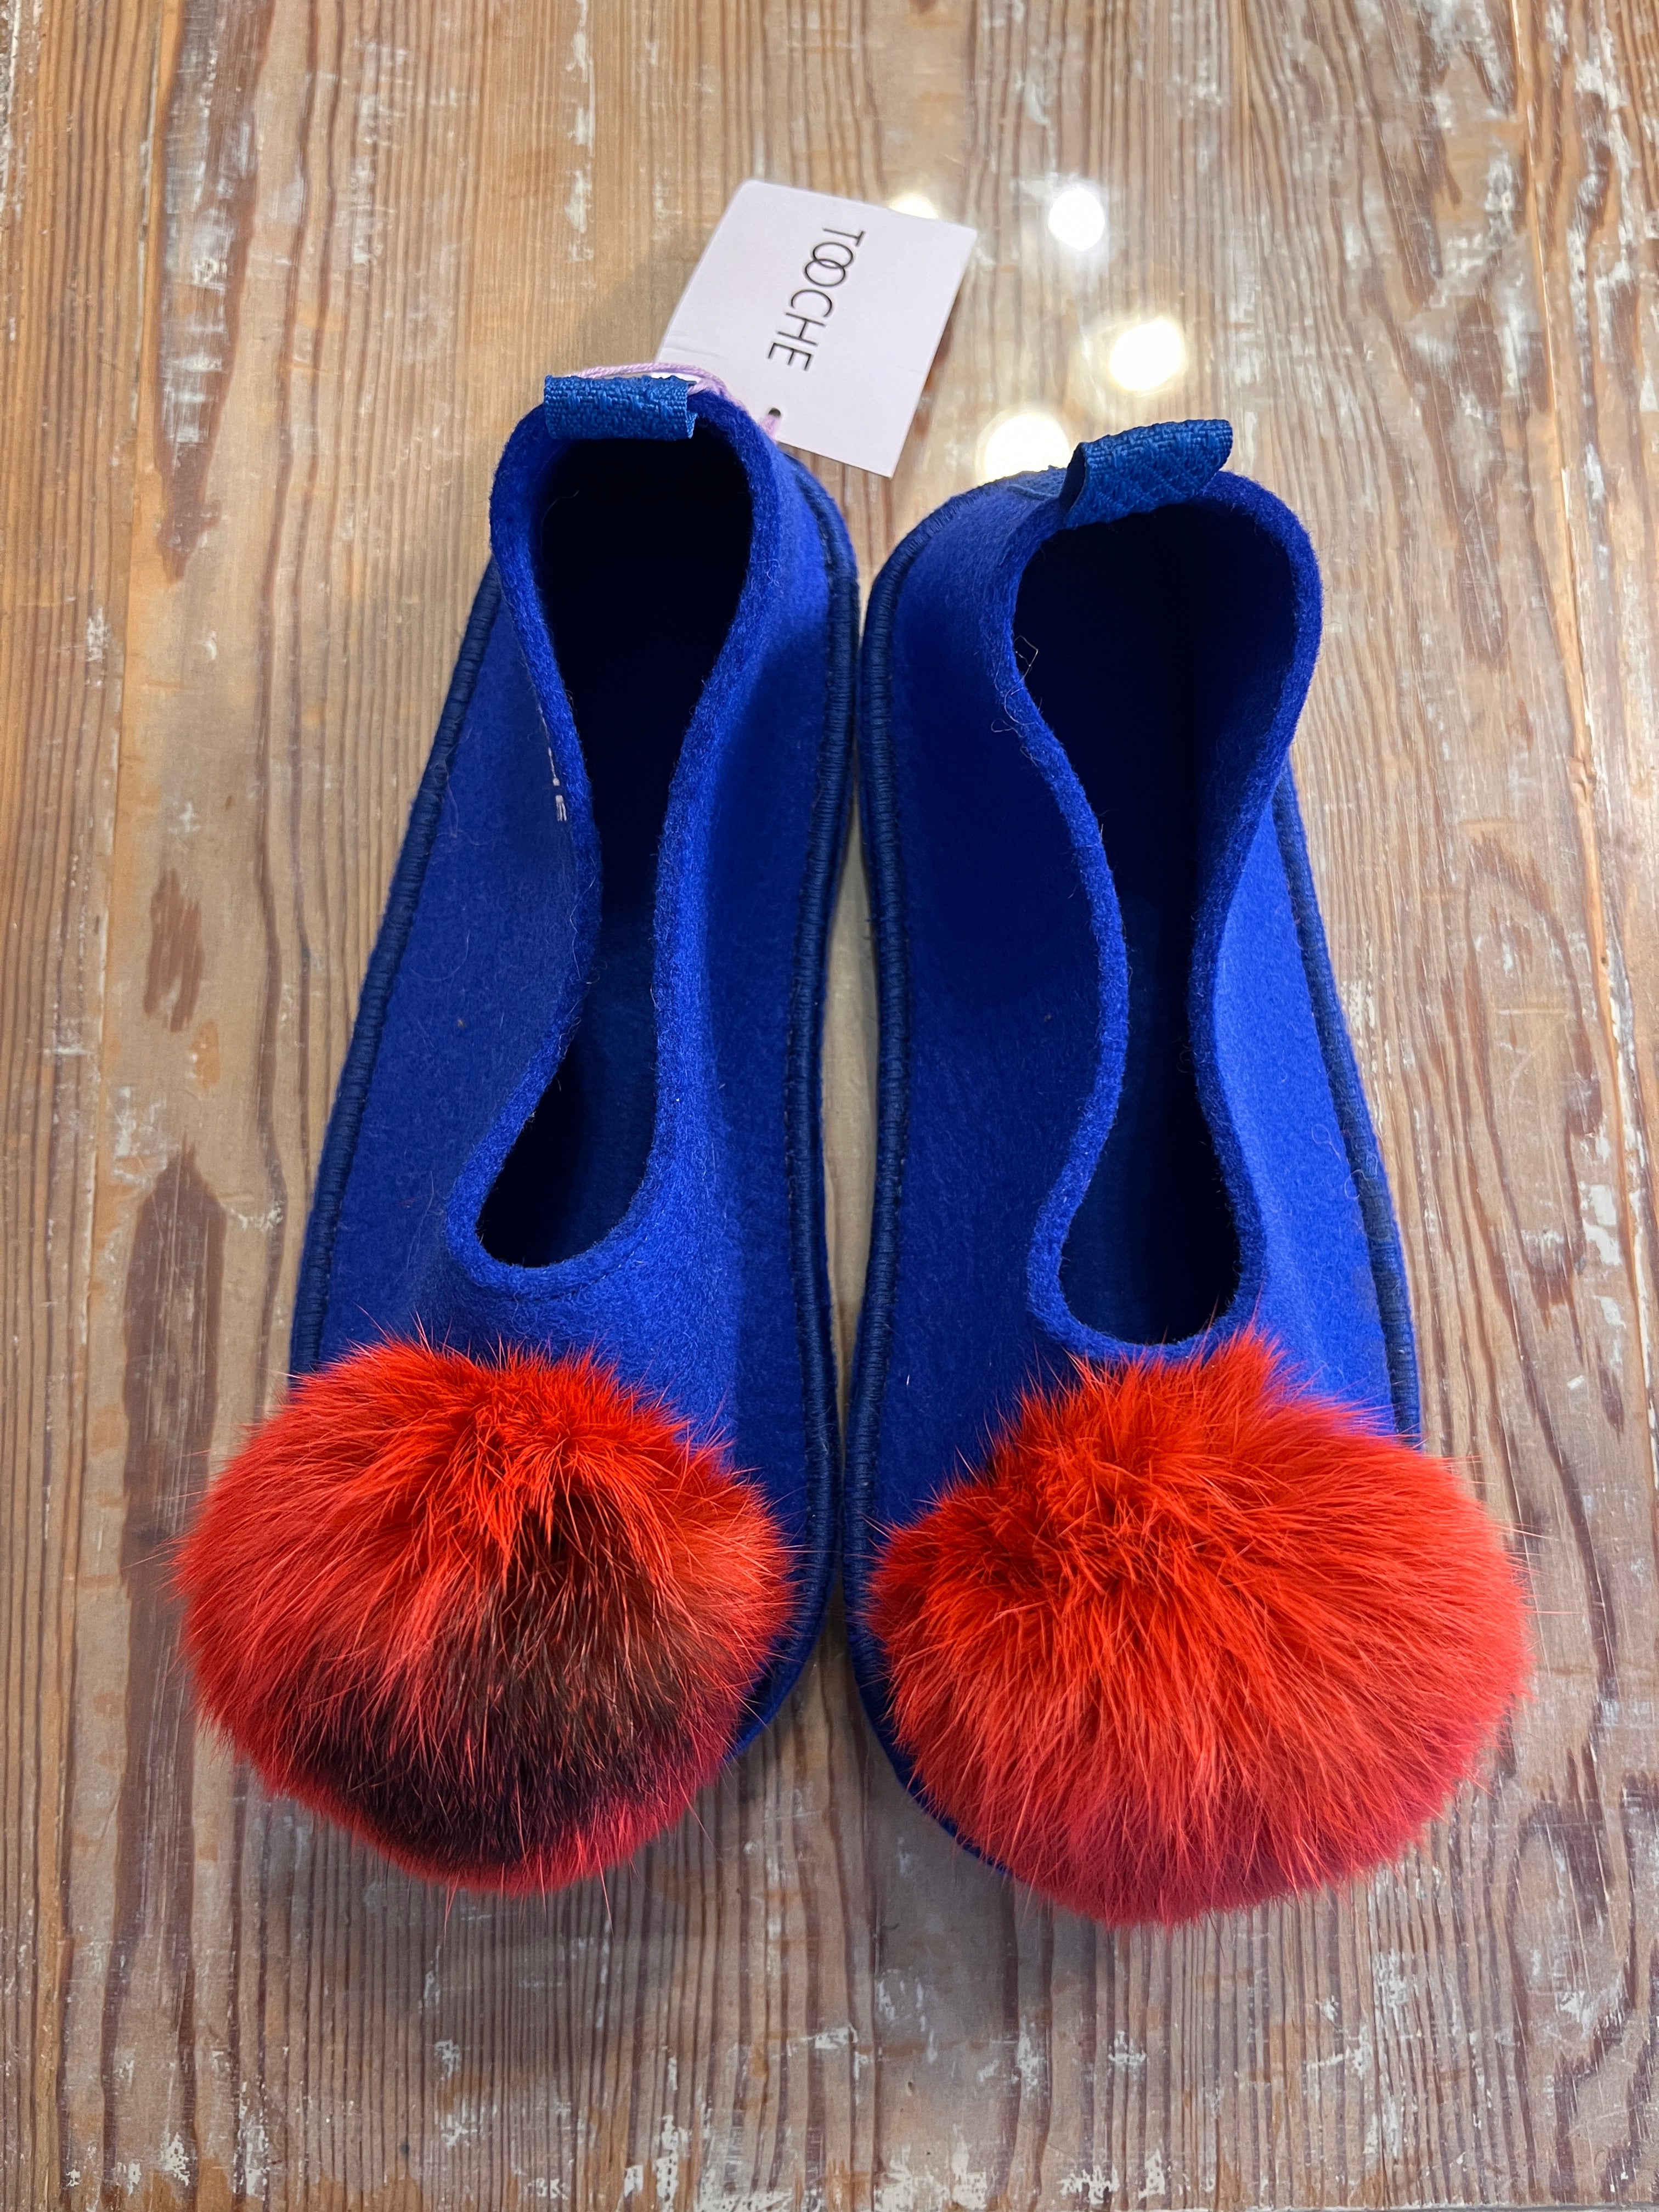 CORAL&BLUE slippers